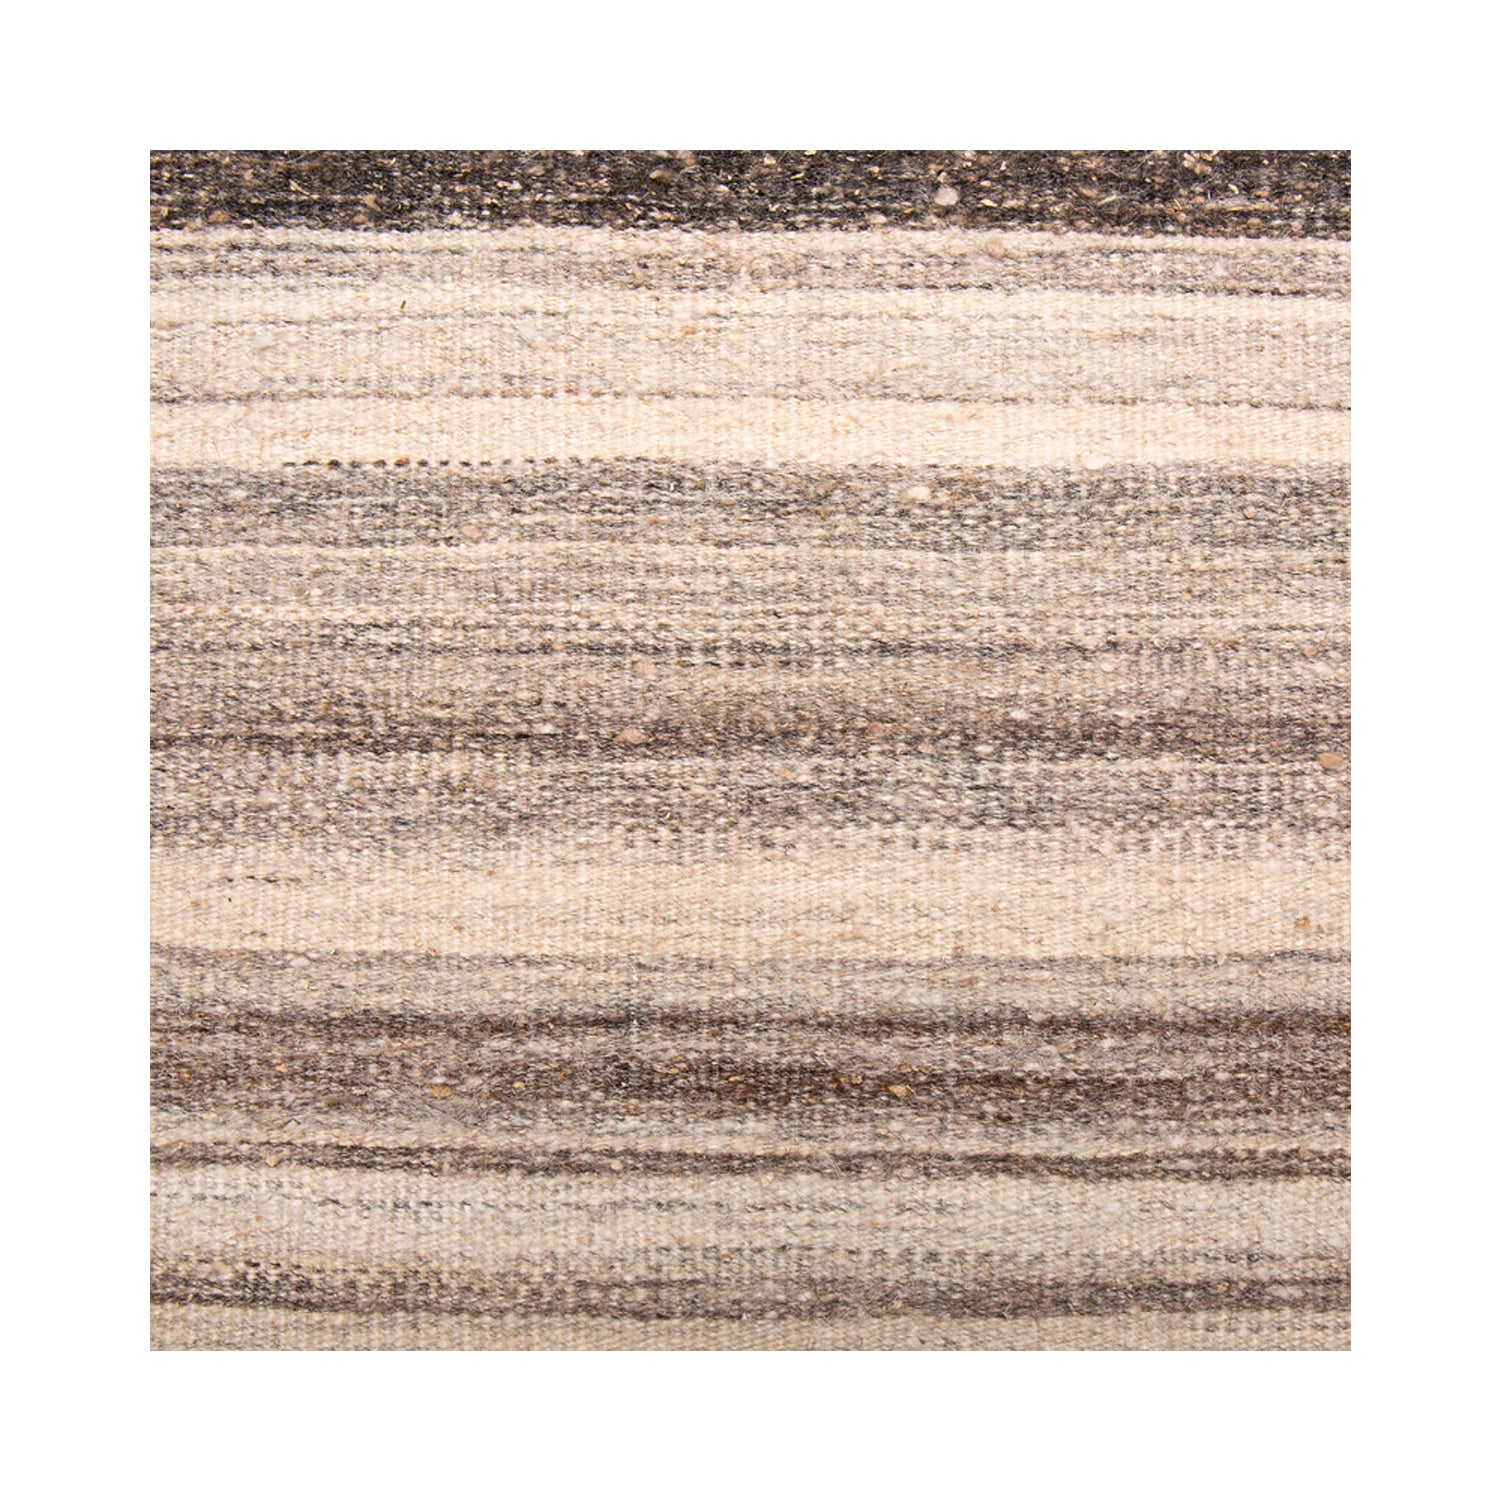 Woven rug detail in a stripe pattern in shades of cream, tan and light brown.